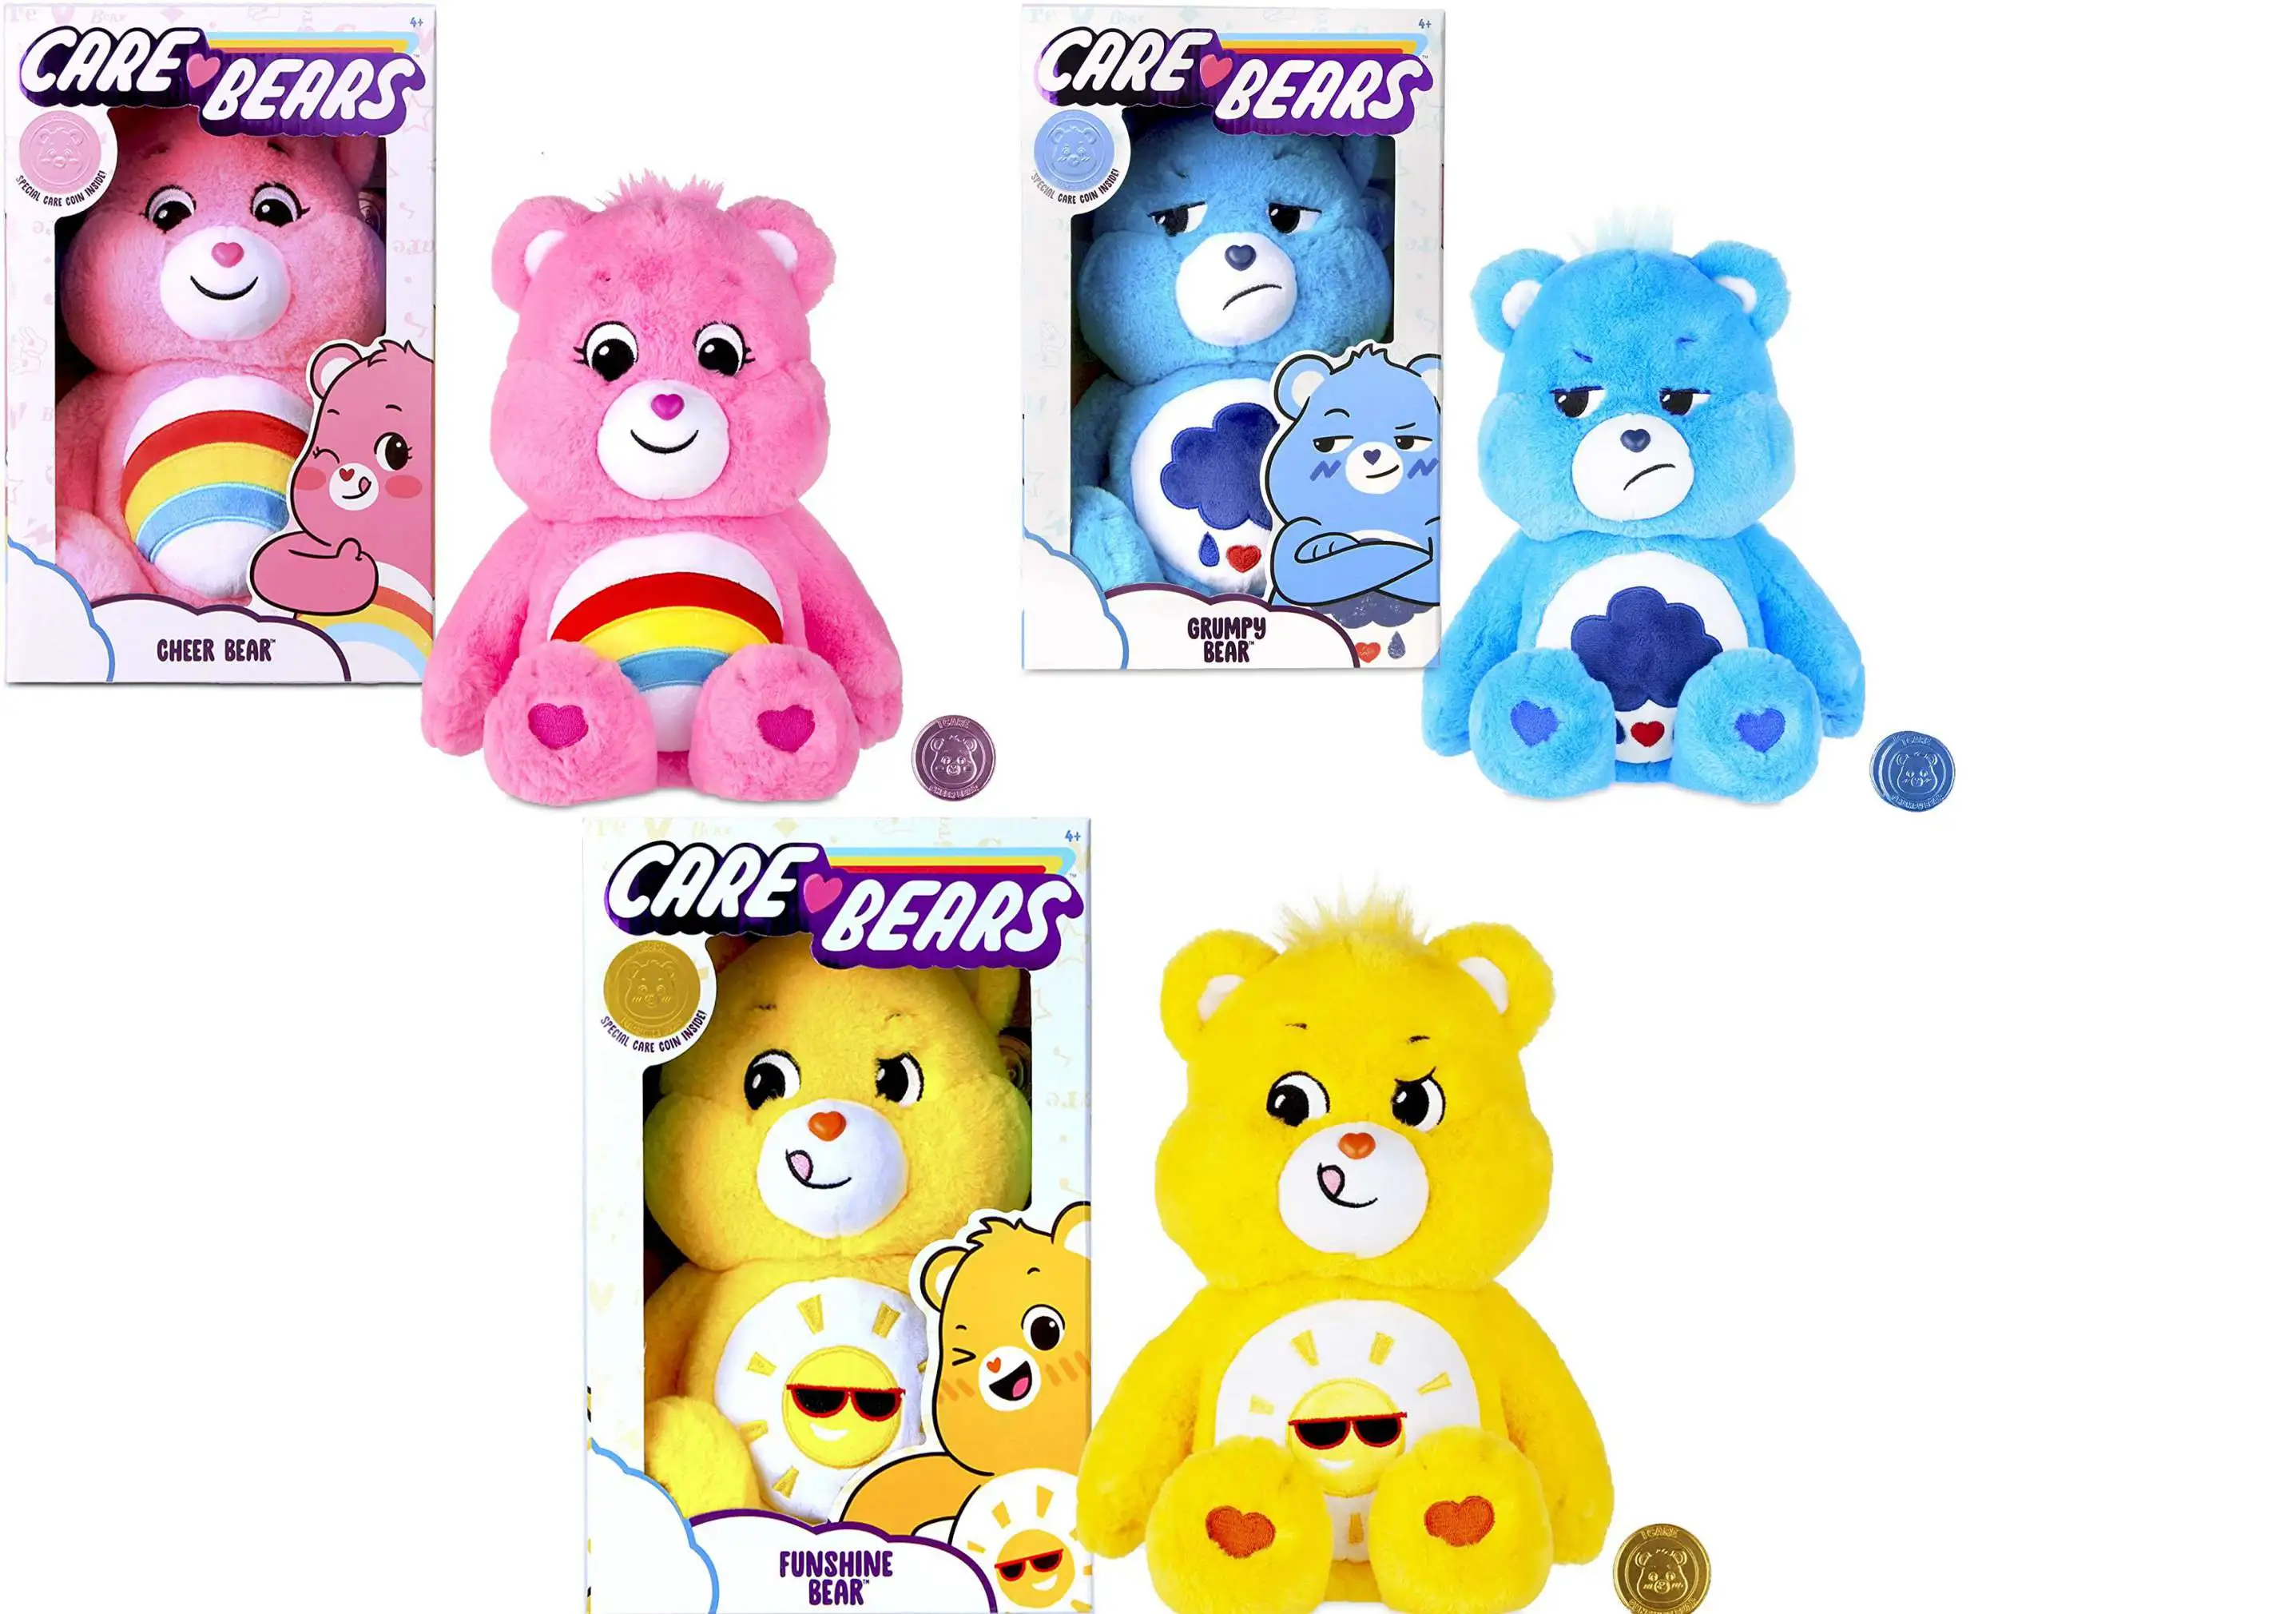 Care Bears Funshine Bear 14-Inch Plush with Collectible Coin 